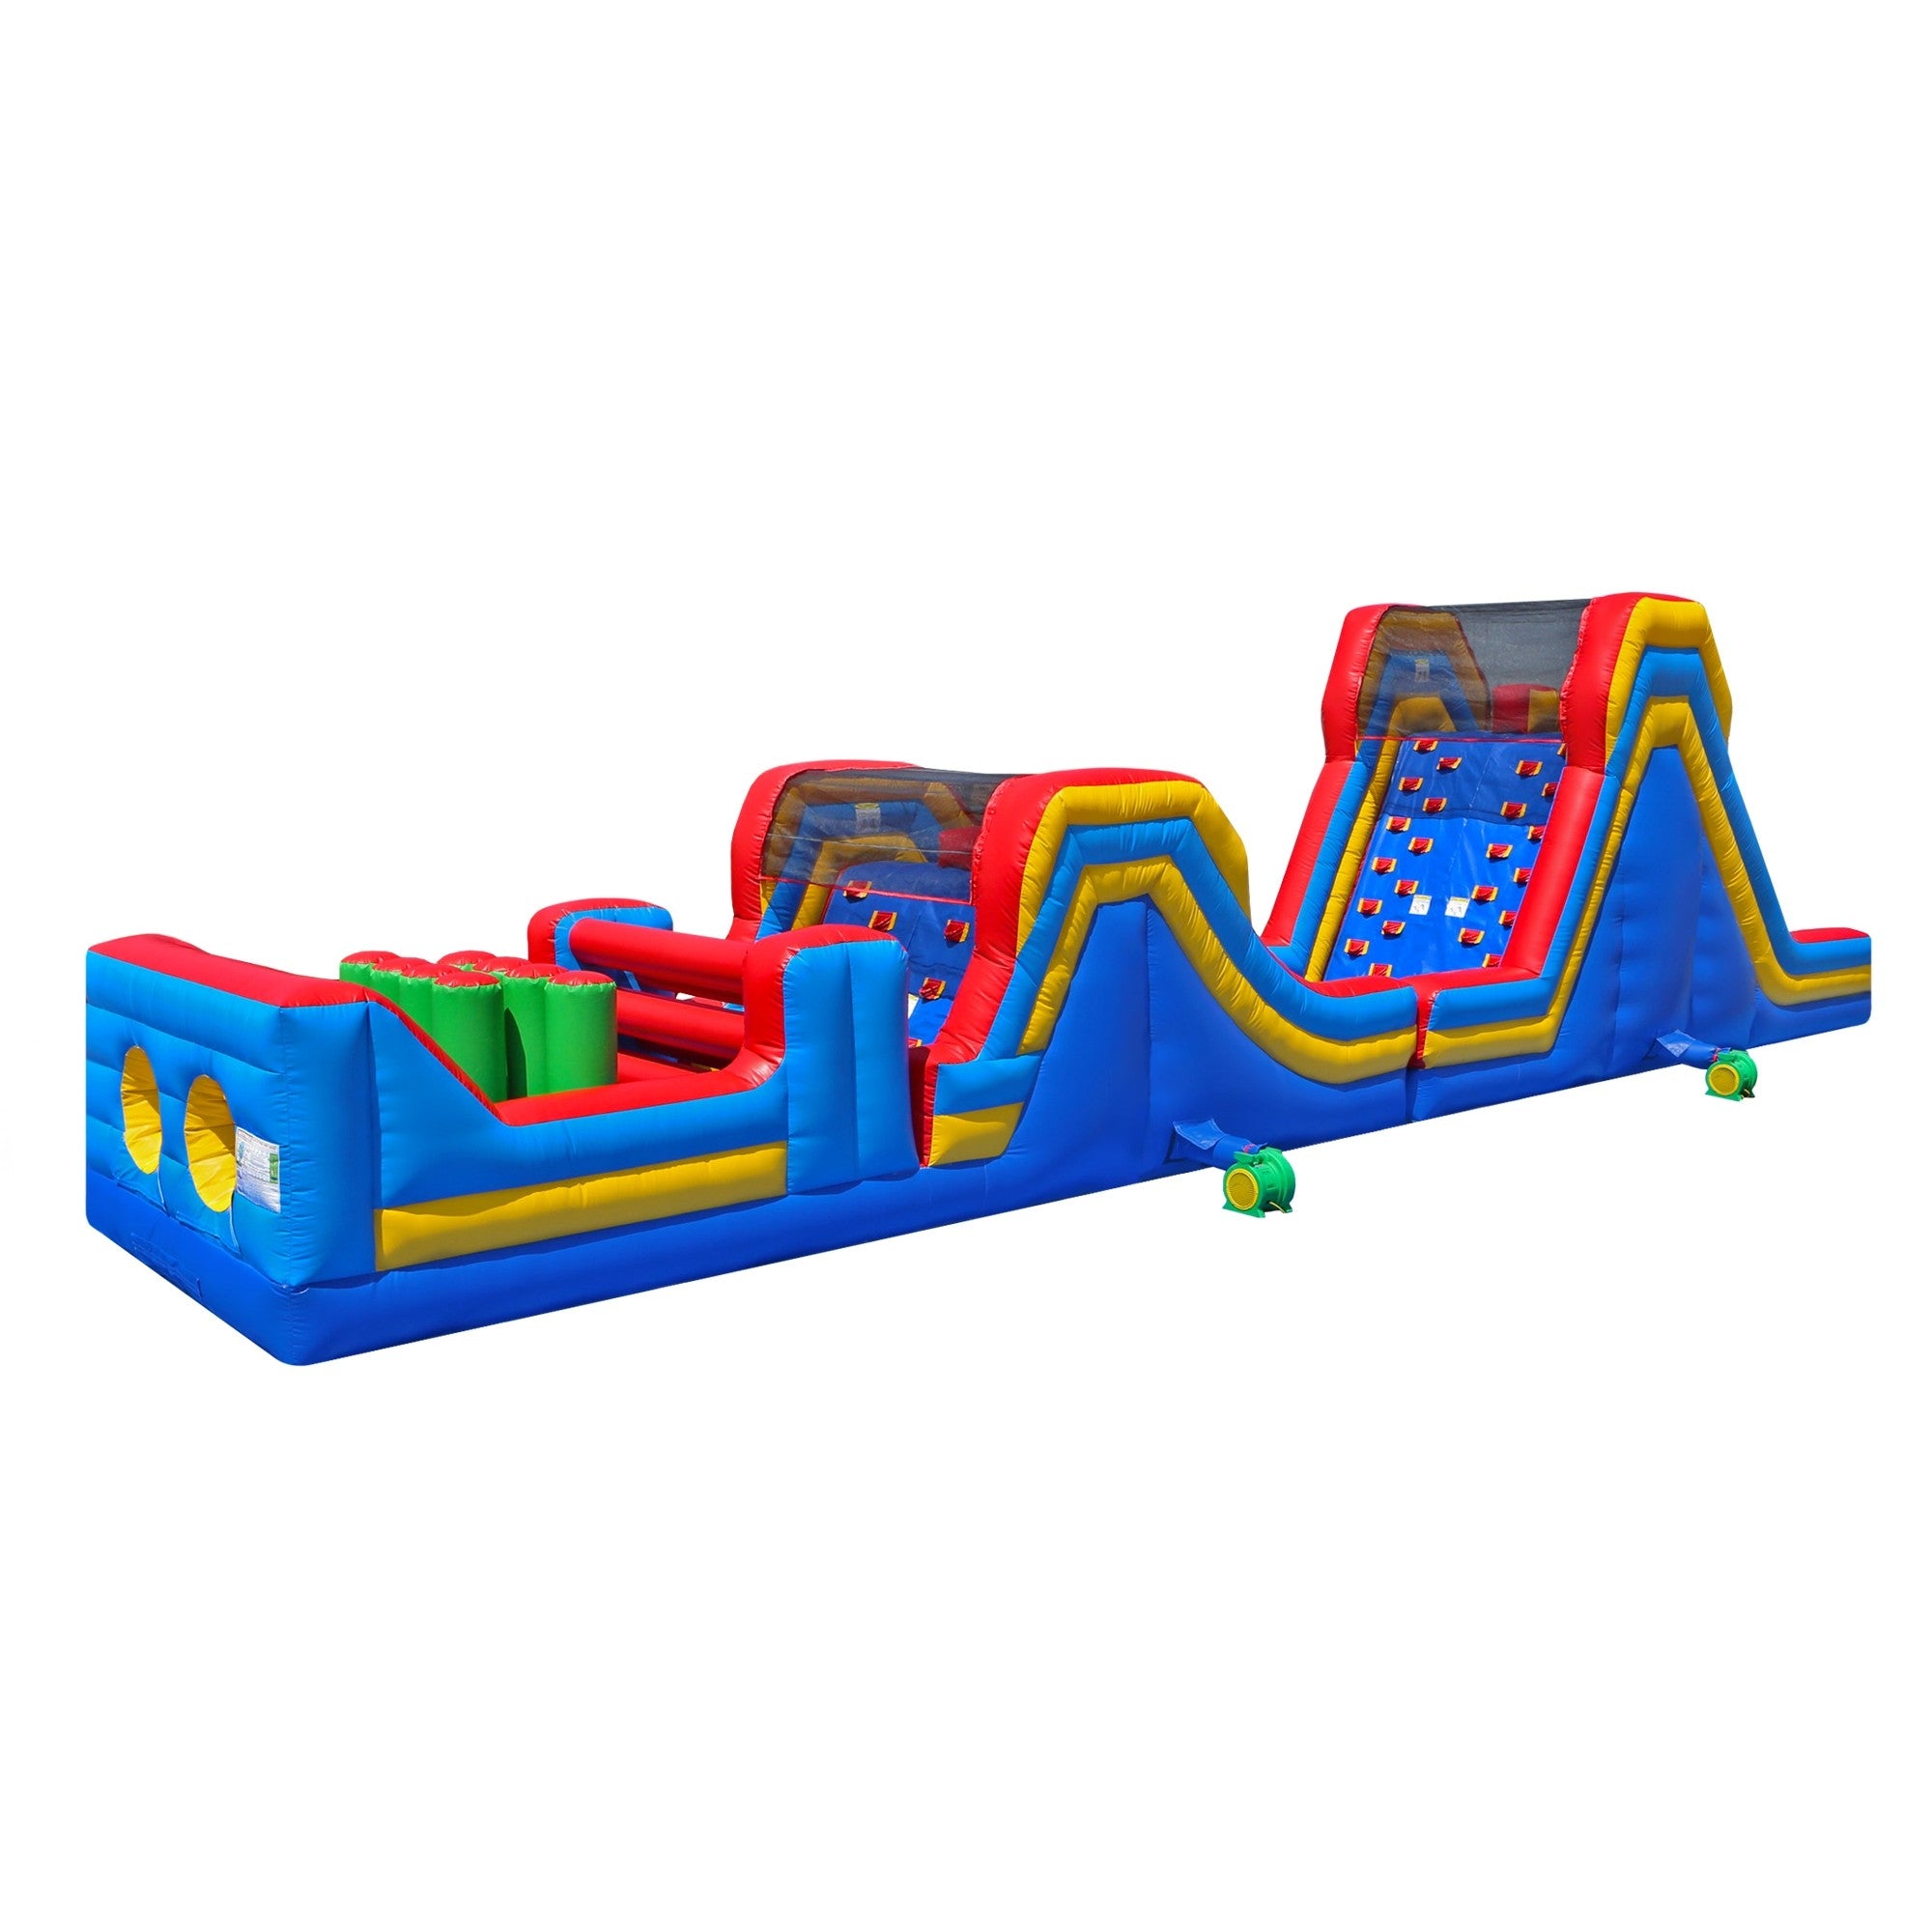 Adult Inflatable Obstacle Course Center Fun Outdoor Assault Water Run High Element Tunnel Line Challenge